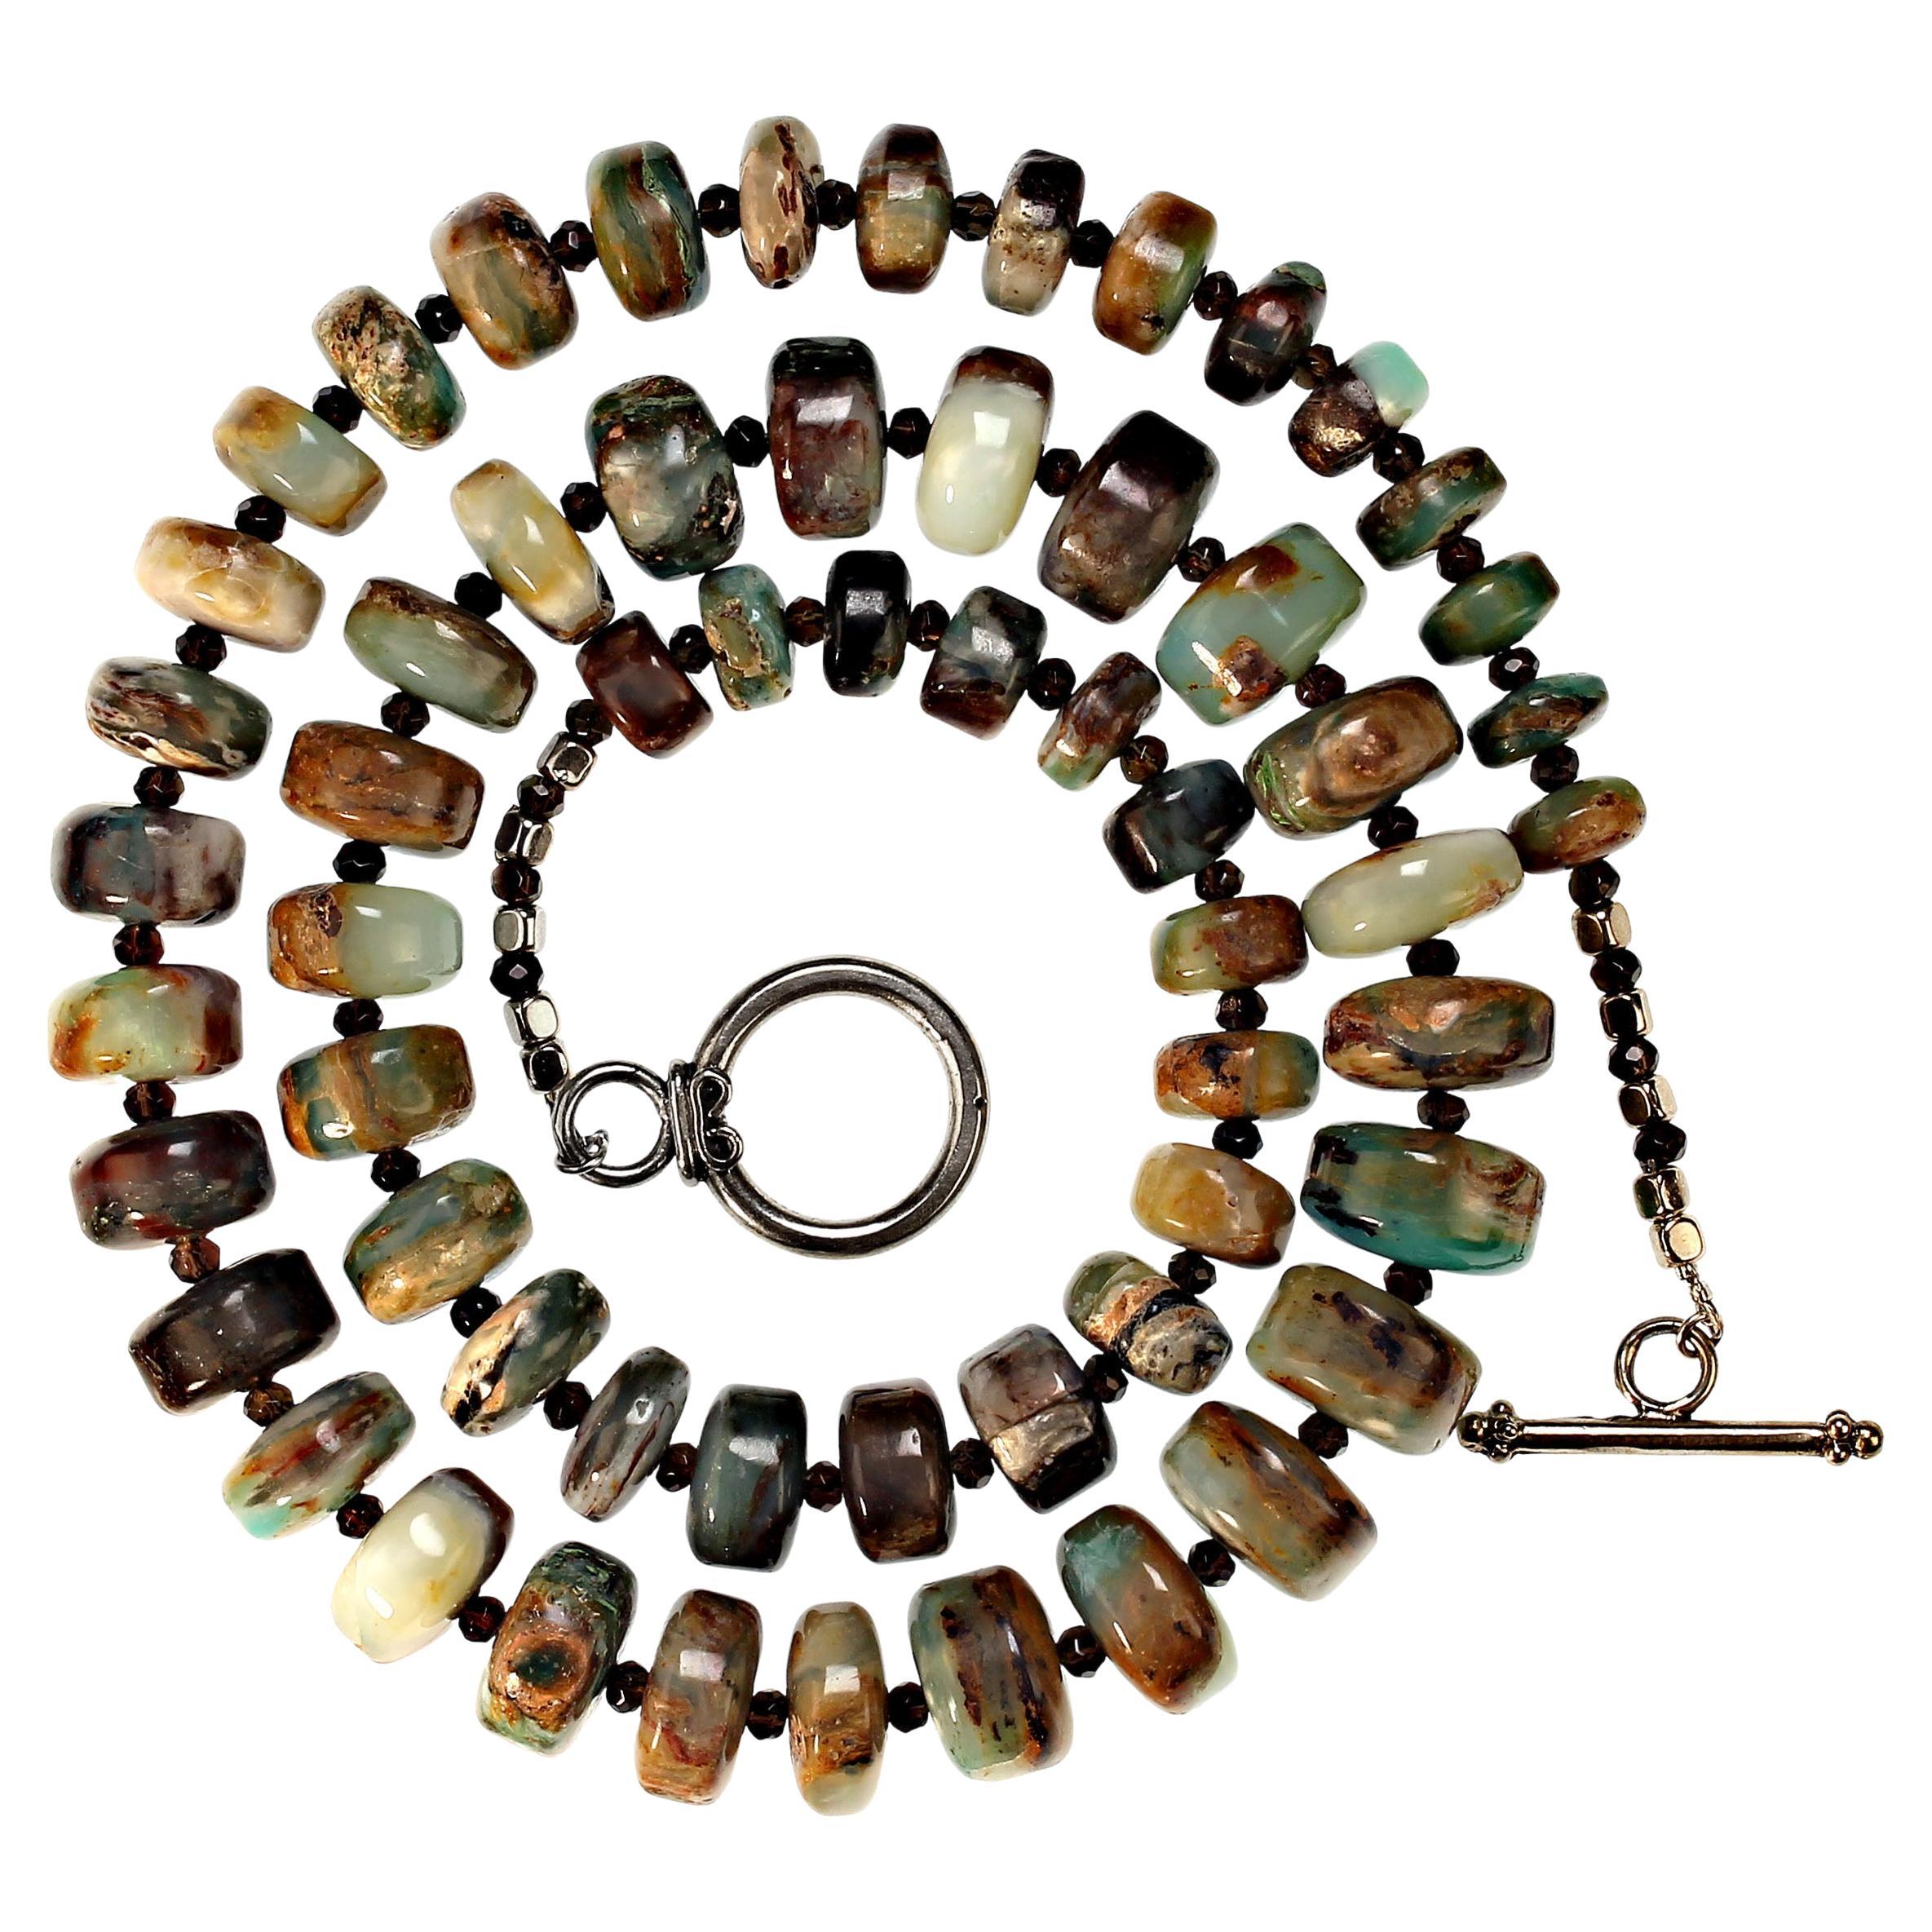 28.5 Inch Graduated Rondels of Highly Polished Peruvian Opal Necklace.  These gorgeous beads are enhanced with sparkling faceted Smoky Quartz. The Peruvian Opal is graduated from 11mm to 16mm.  The Smoky Quartz is 3mm. The necklace is secured with a